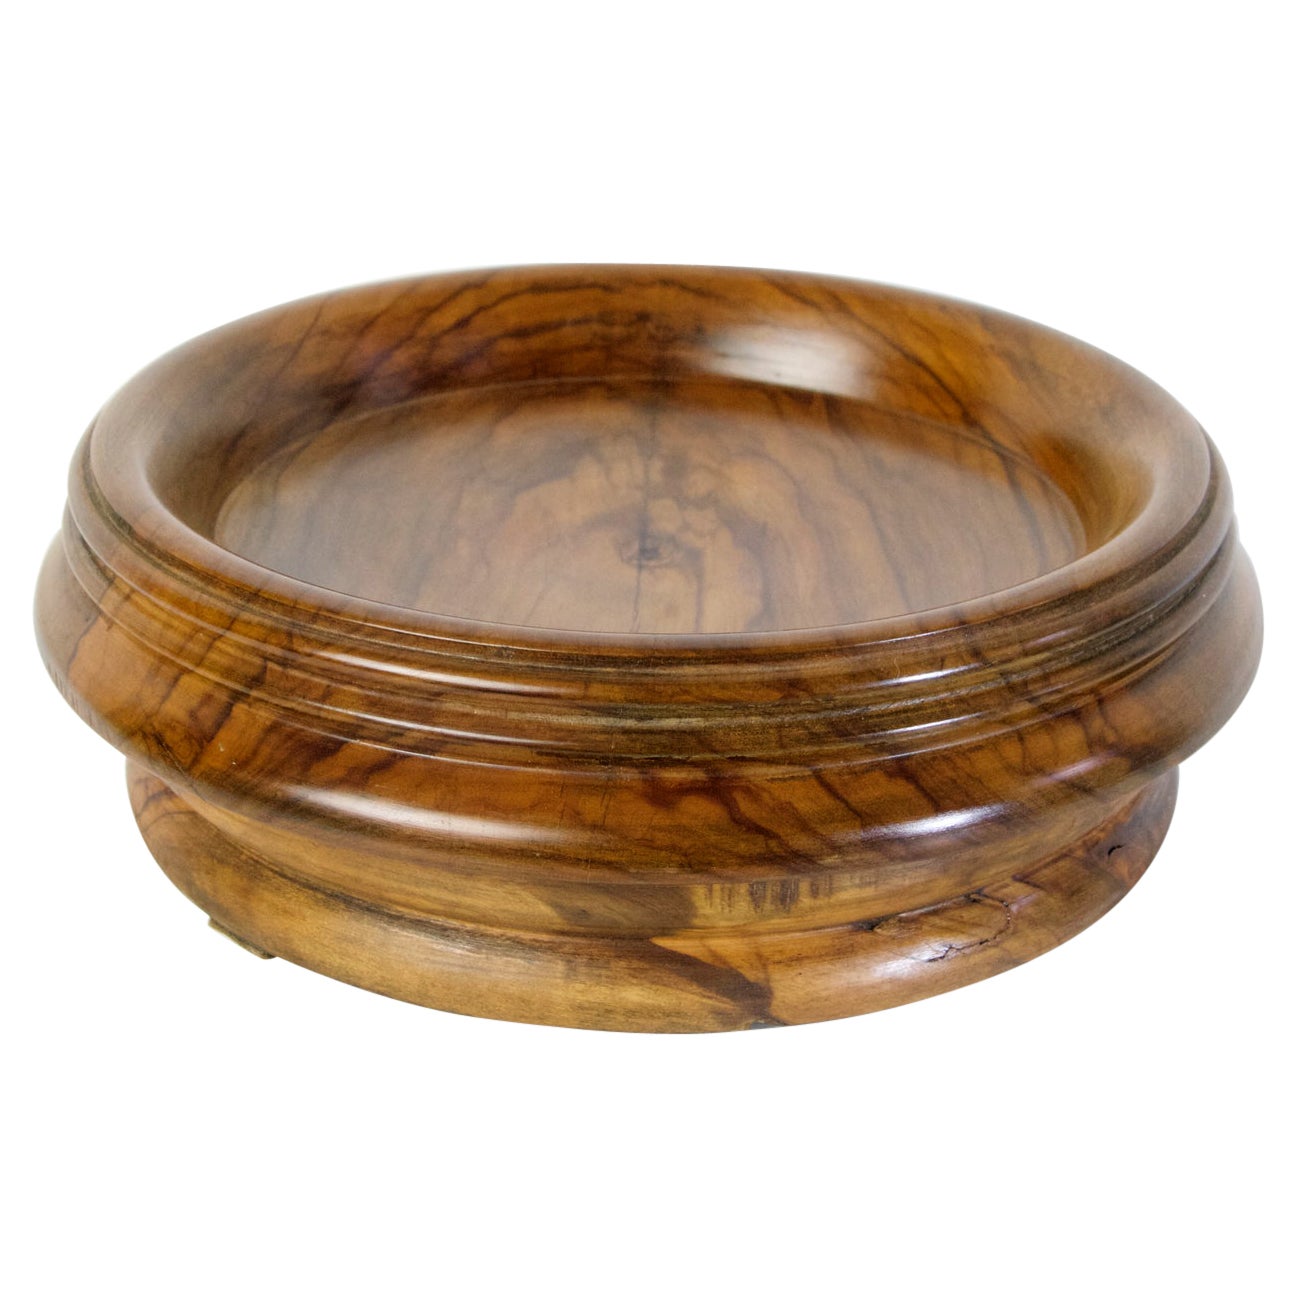 This antique vide poche bowl was made with a lathe from olive wood during the late 1800's. It is in extremely good condition and without any damages.